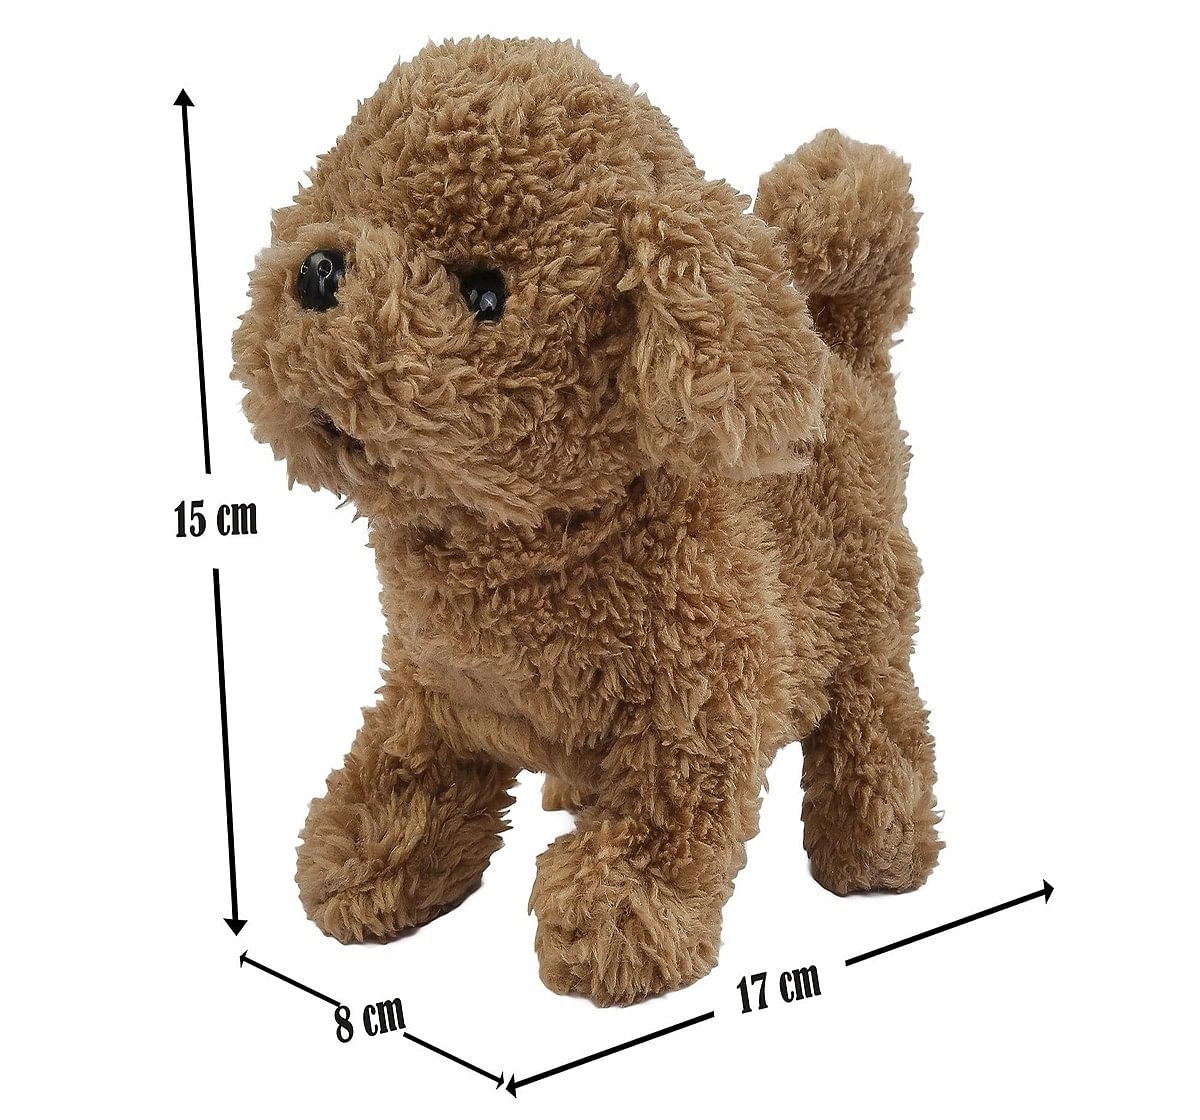 Hamleys Movers & Shakers Baby Cairn Terrier Plush Soft Dog Toy (Brown), 3Y+